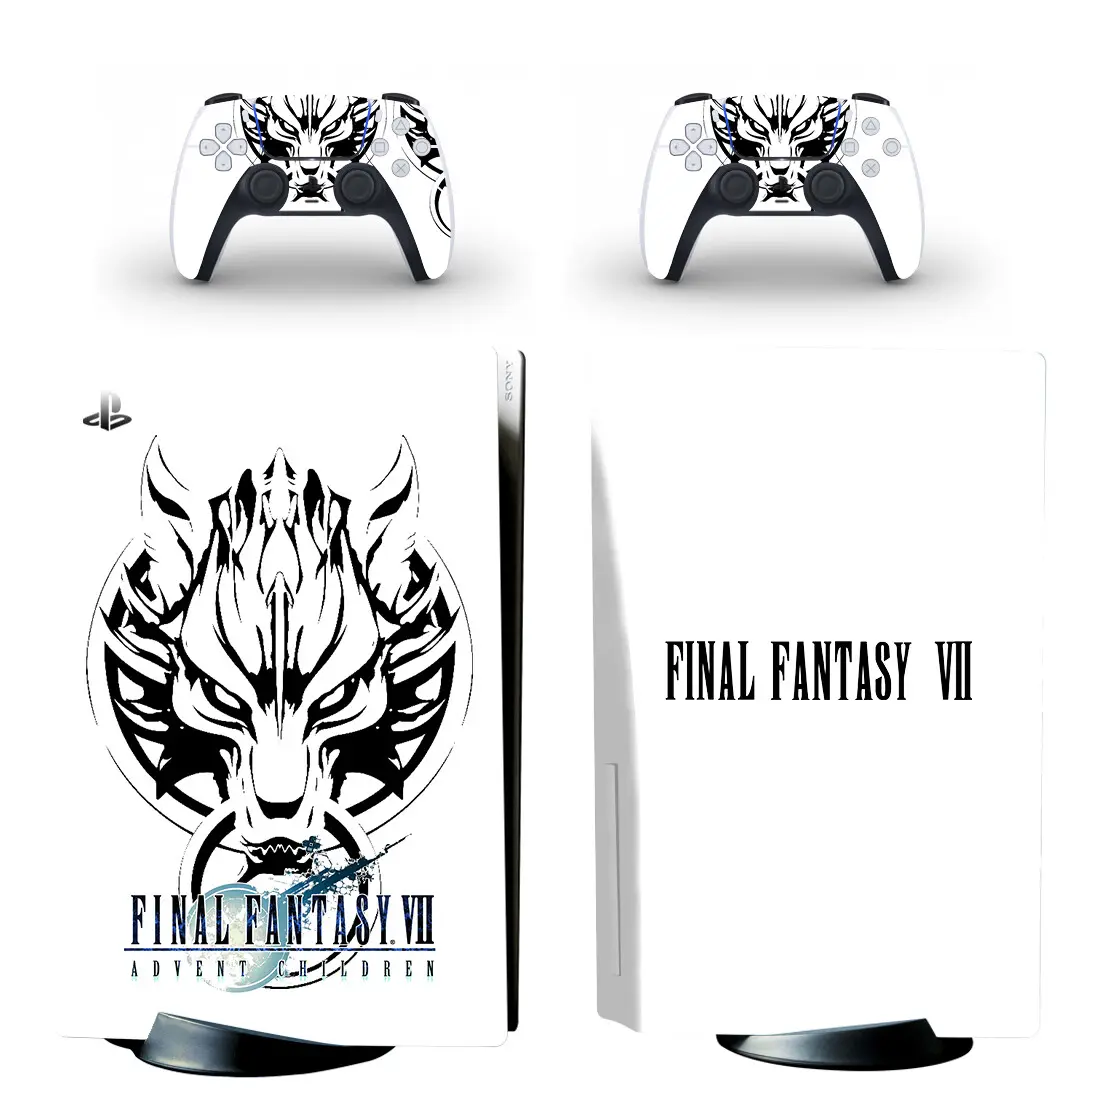 Classic Game Sticker Skin Decal Cover Case for PS 5 with Disc Drive Console and PS5 2 Controllers Vinyl Skin